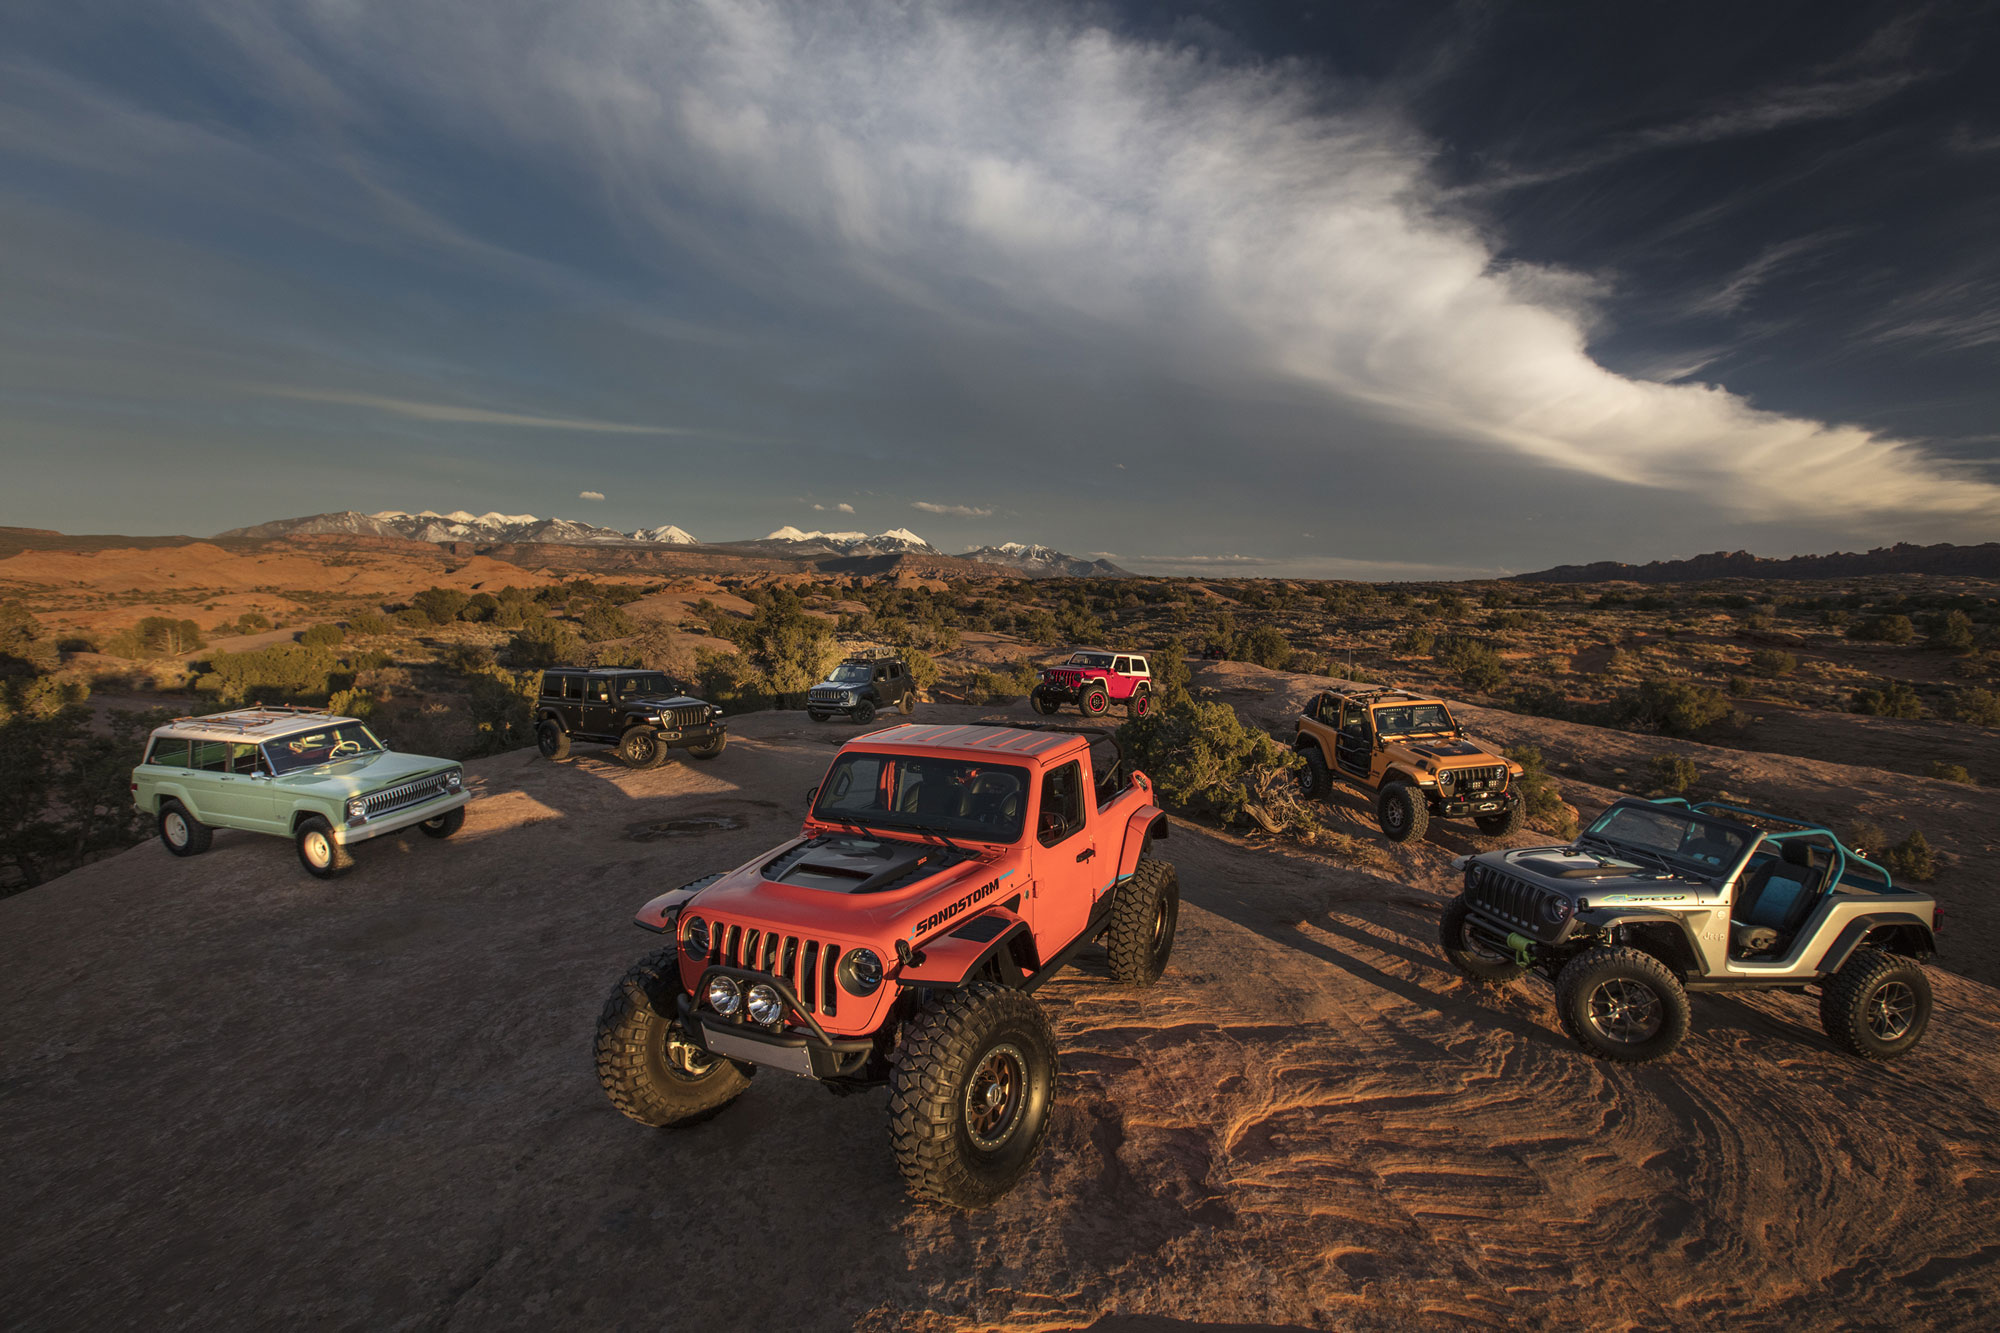 Several Jeeps parked in the wilderness near Moab